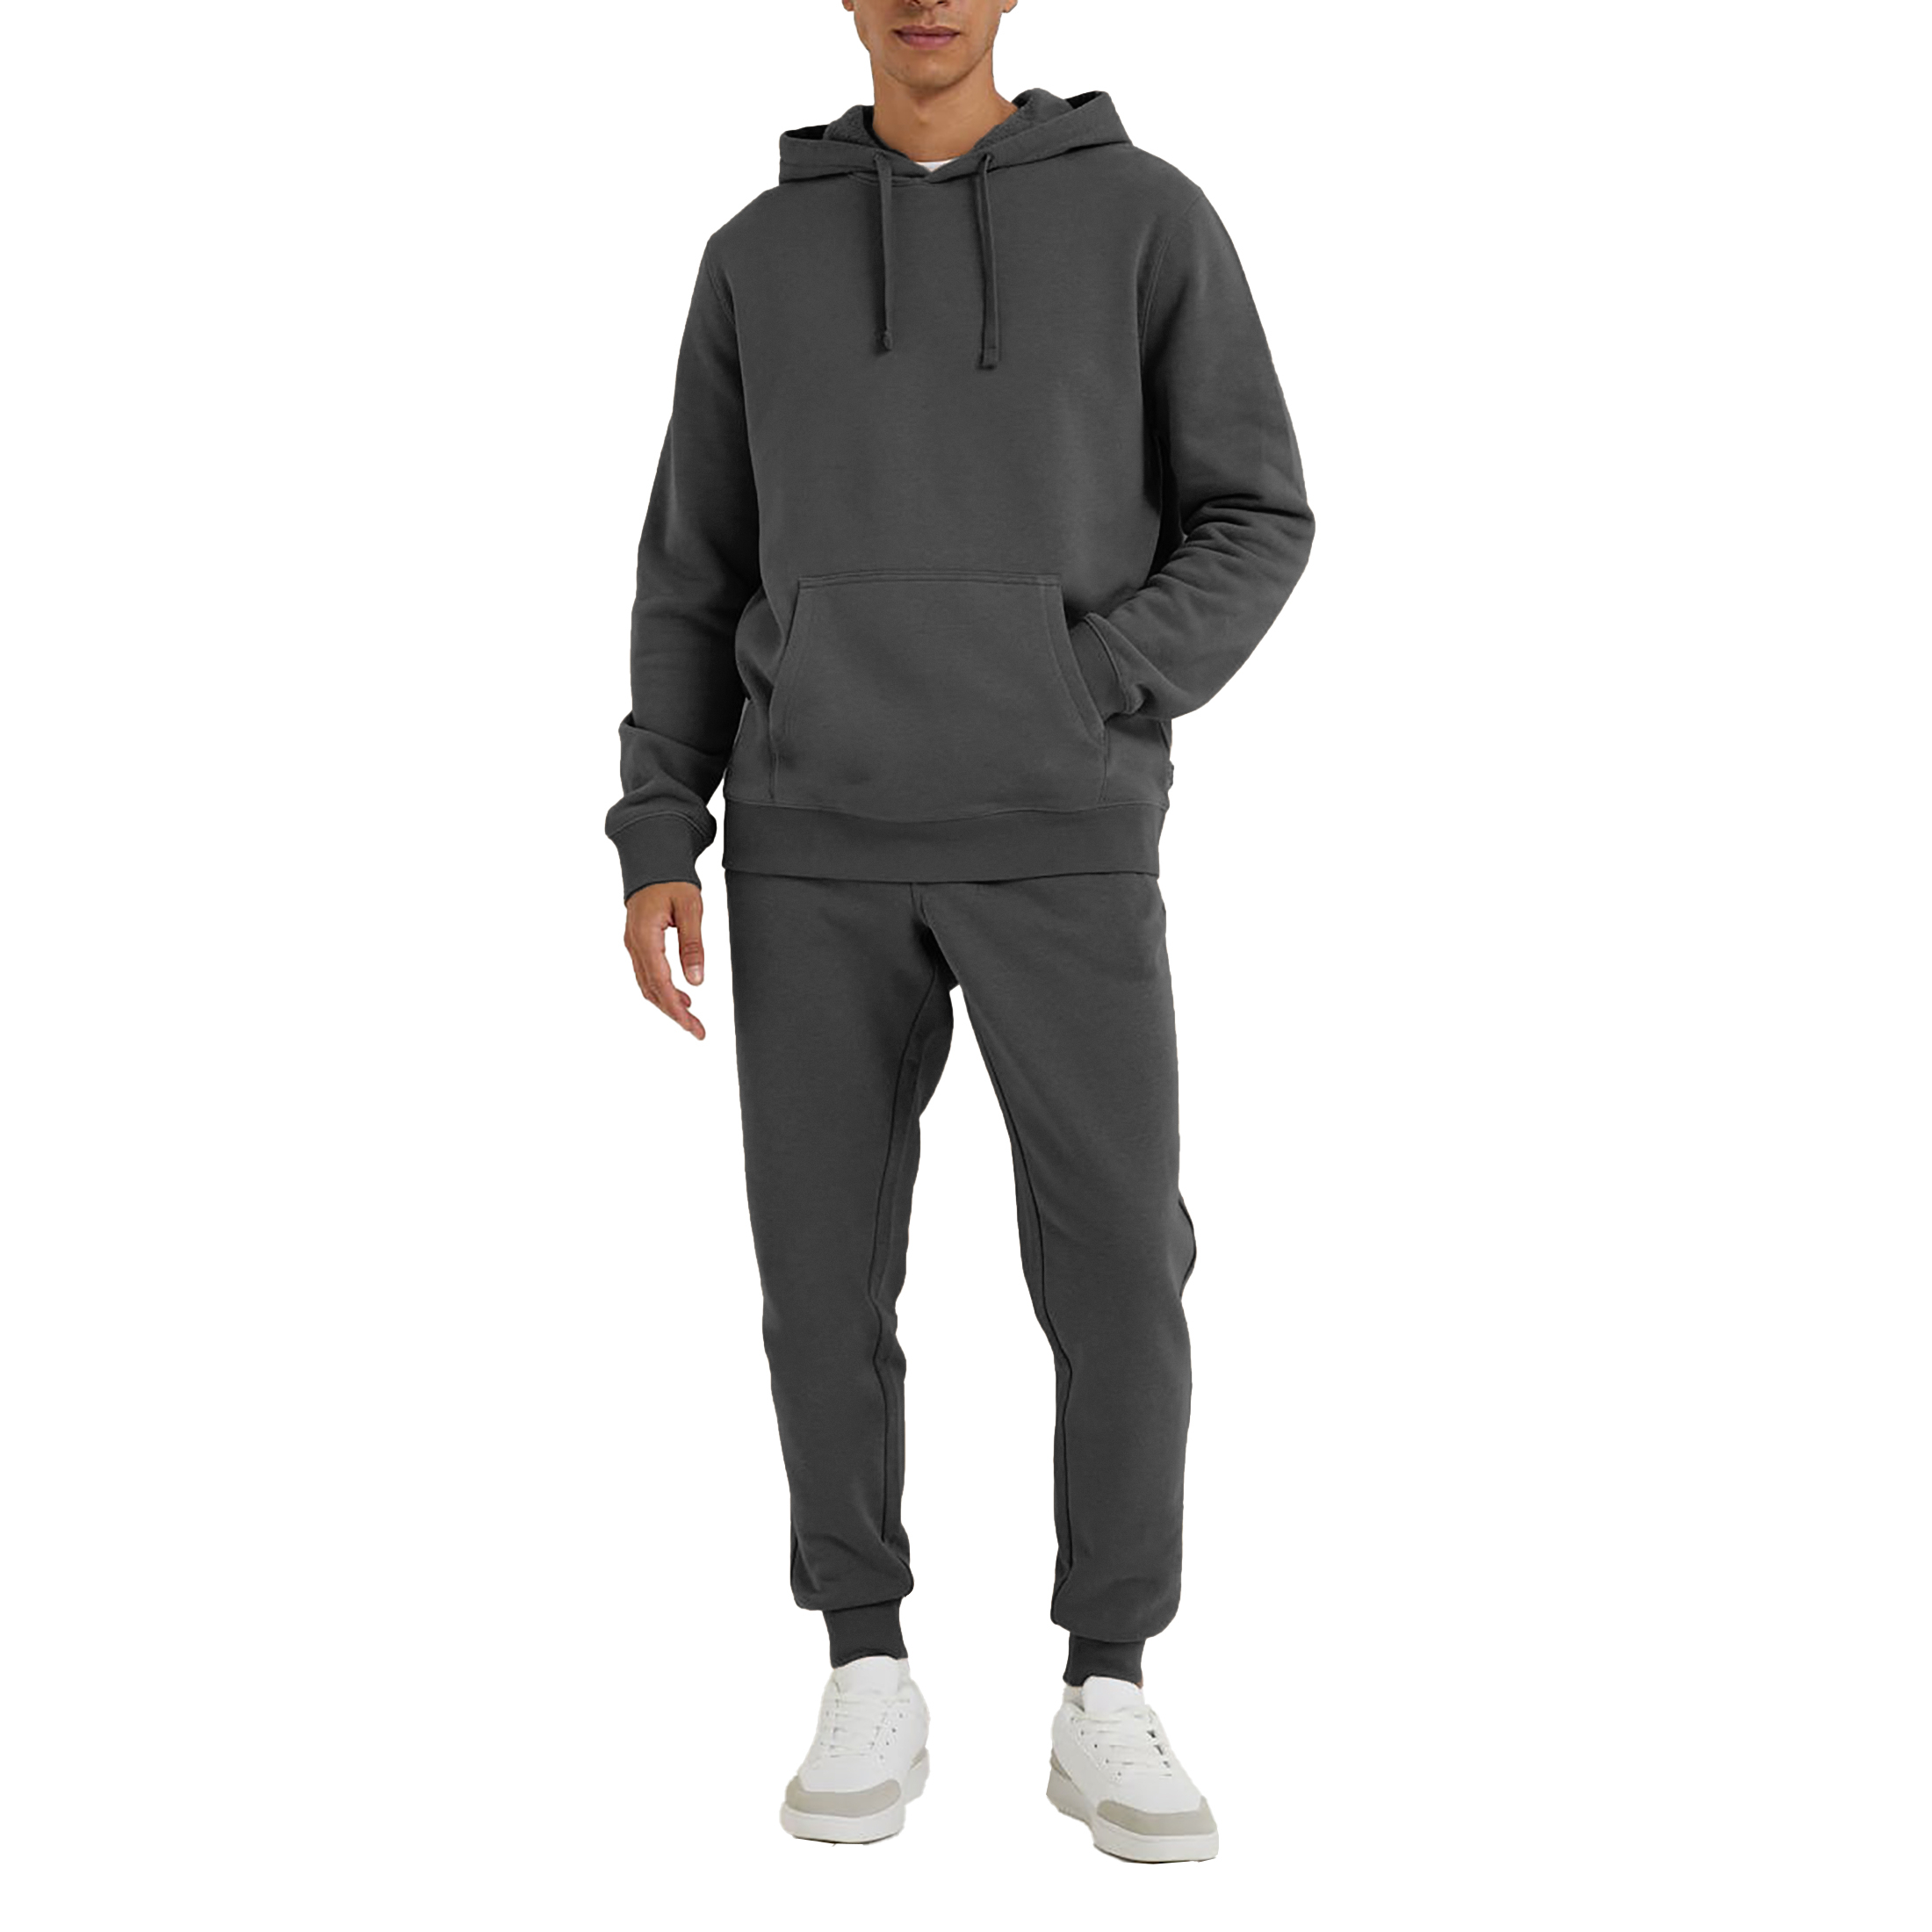 Men's Athletic Warm Jogging Pullover Active Tracksuit - Charcoal, Small